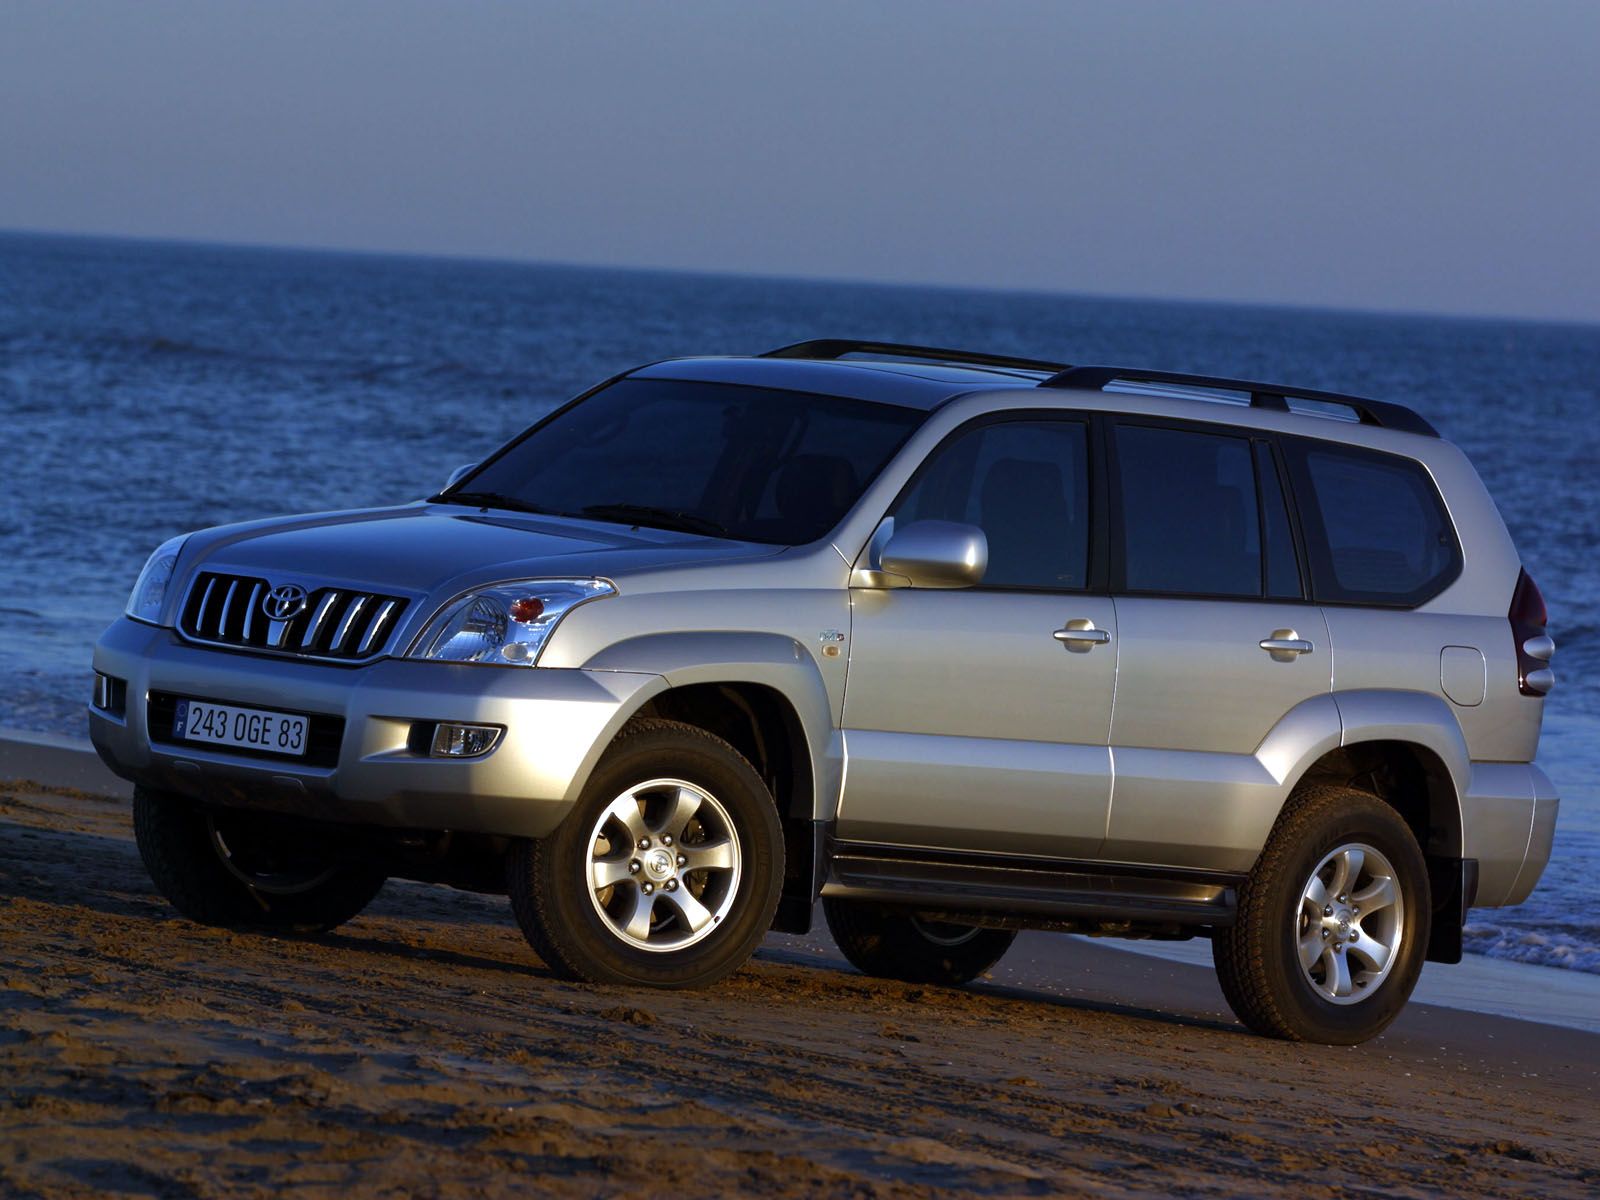 Toyota Land Cruiser 120 photos PhotoGallery with 9 pics